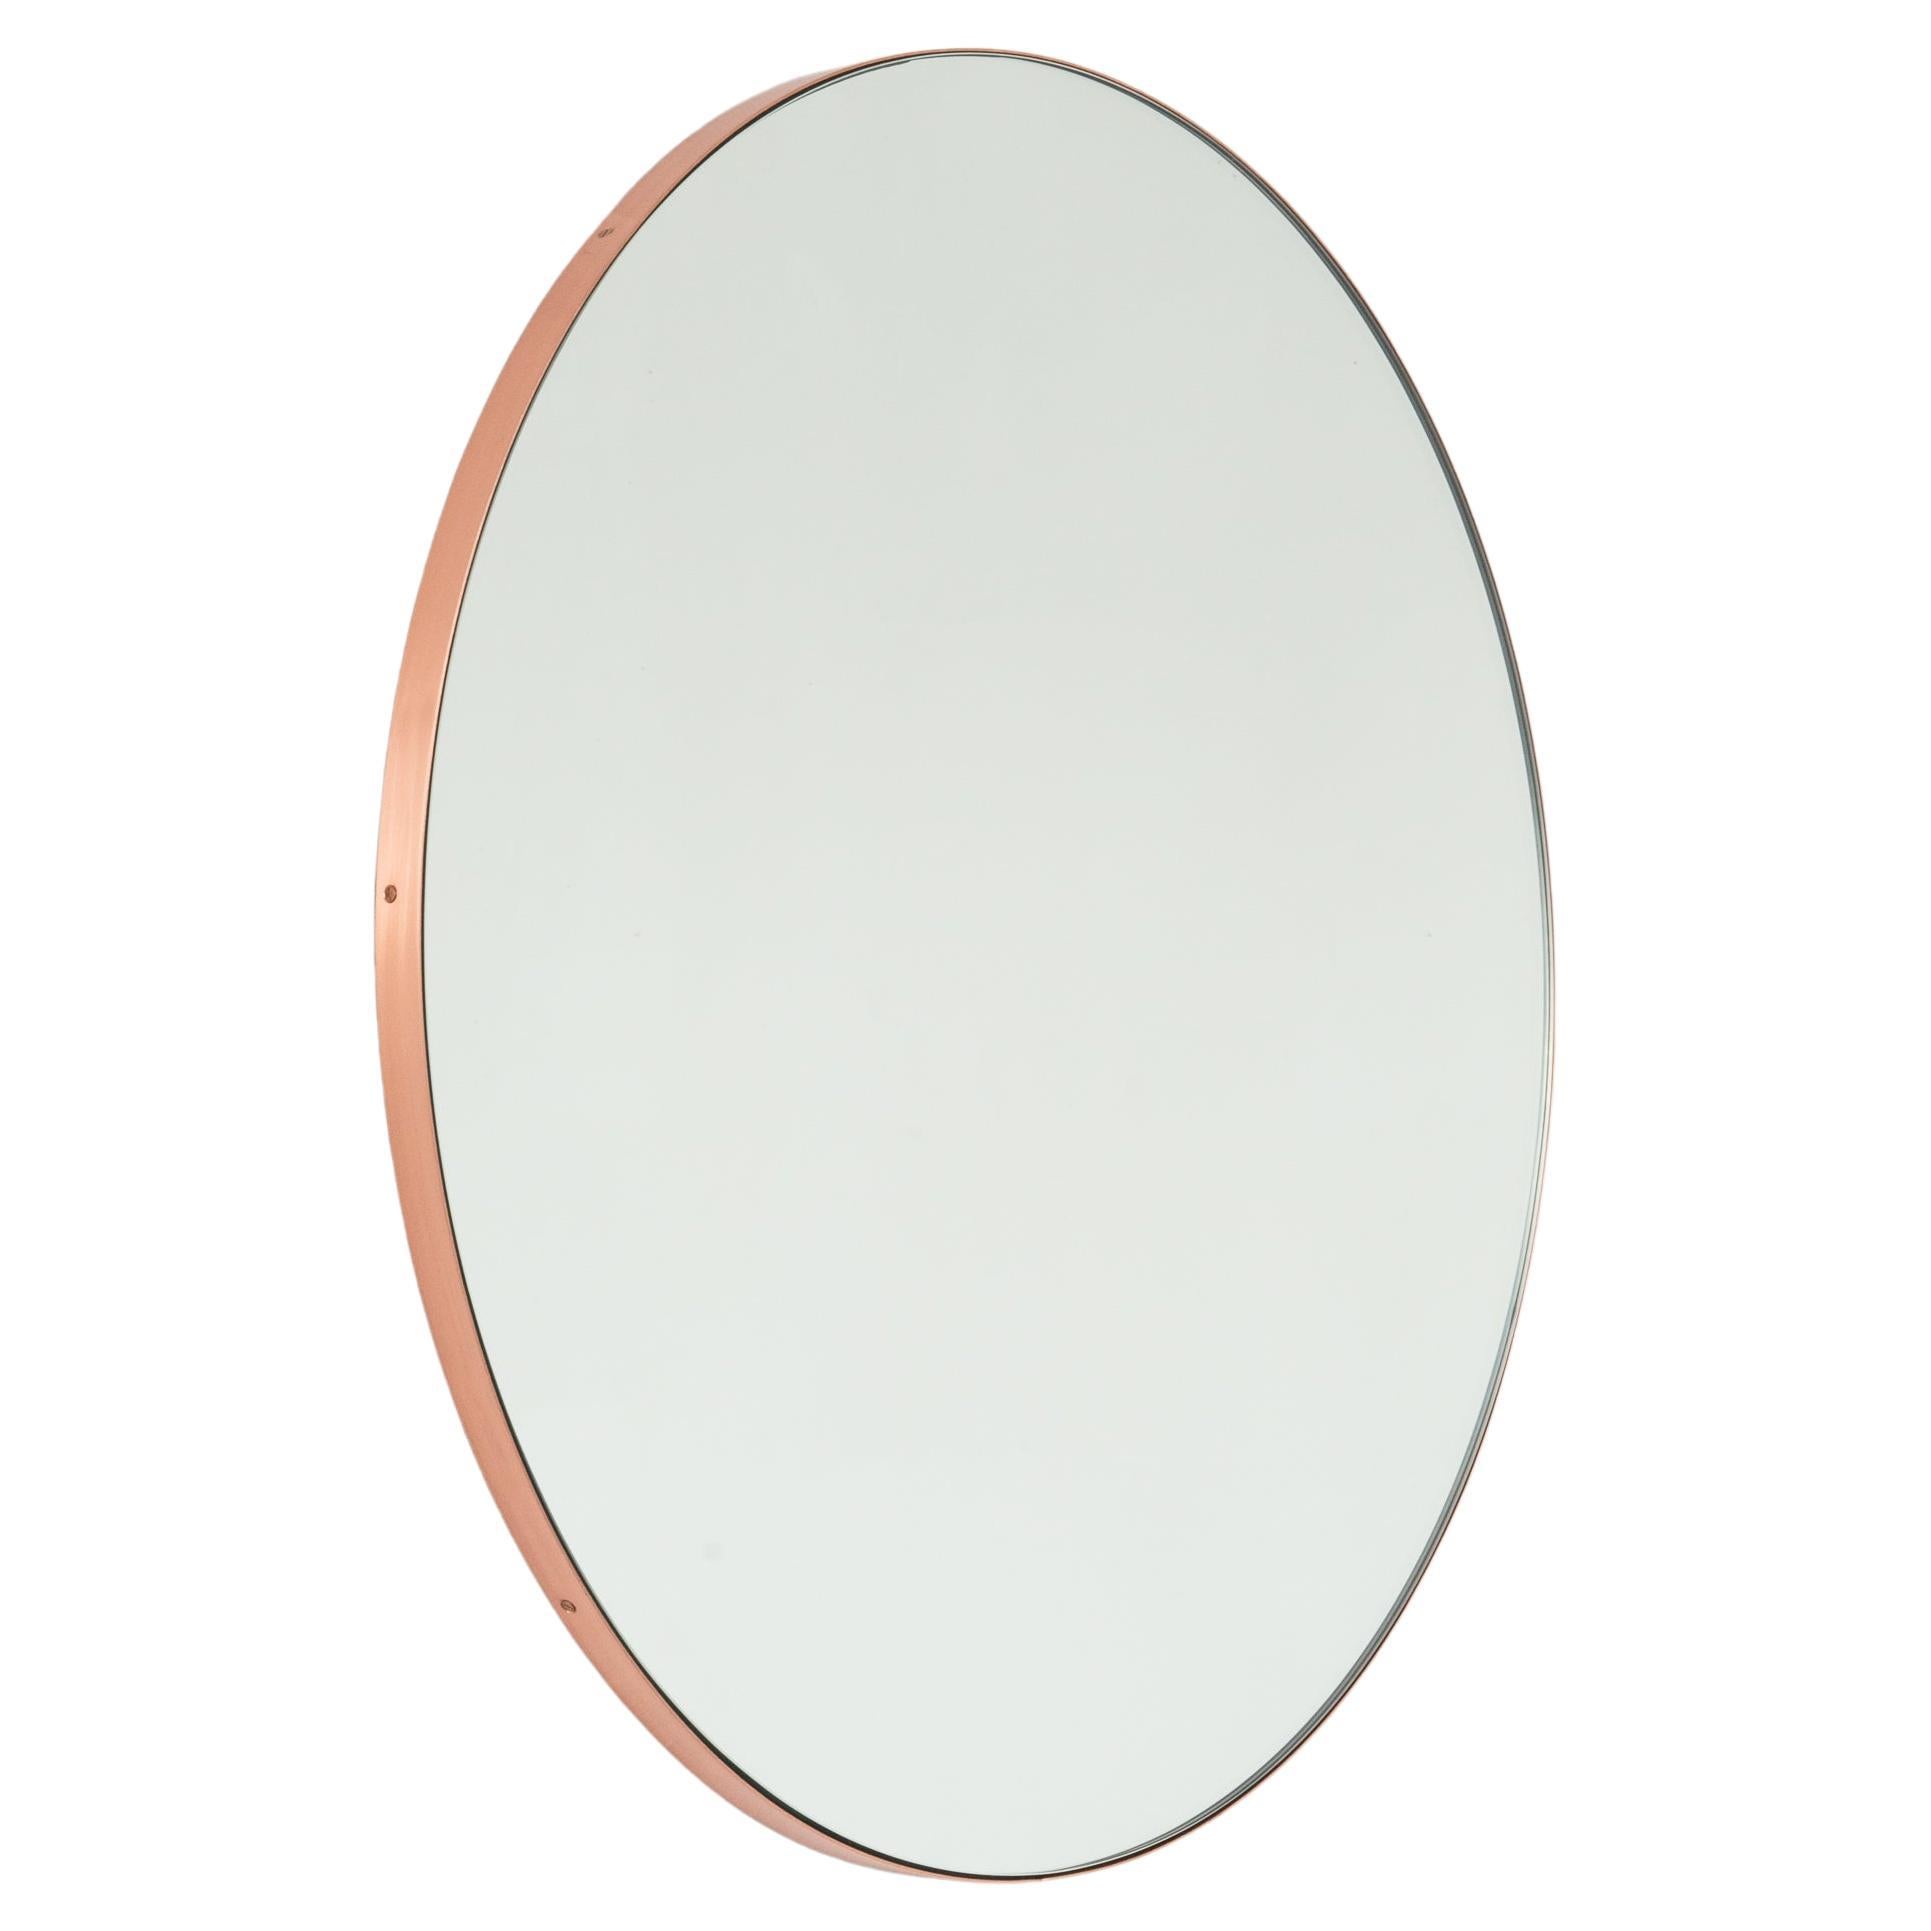 Orbis Round Contemporary Mirror with Copper Frame, Medium For Sale